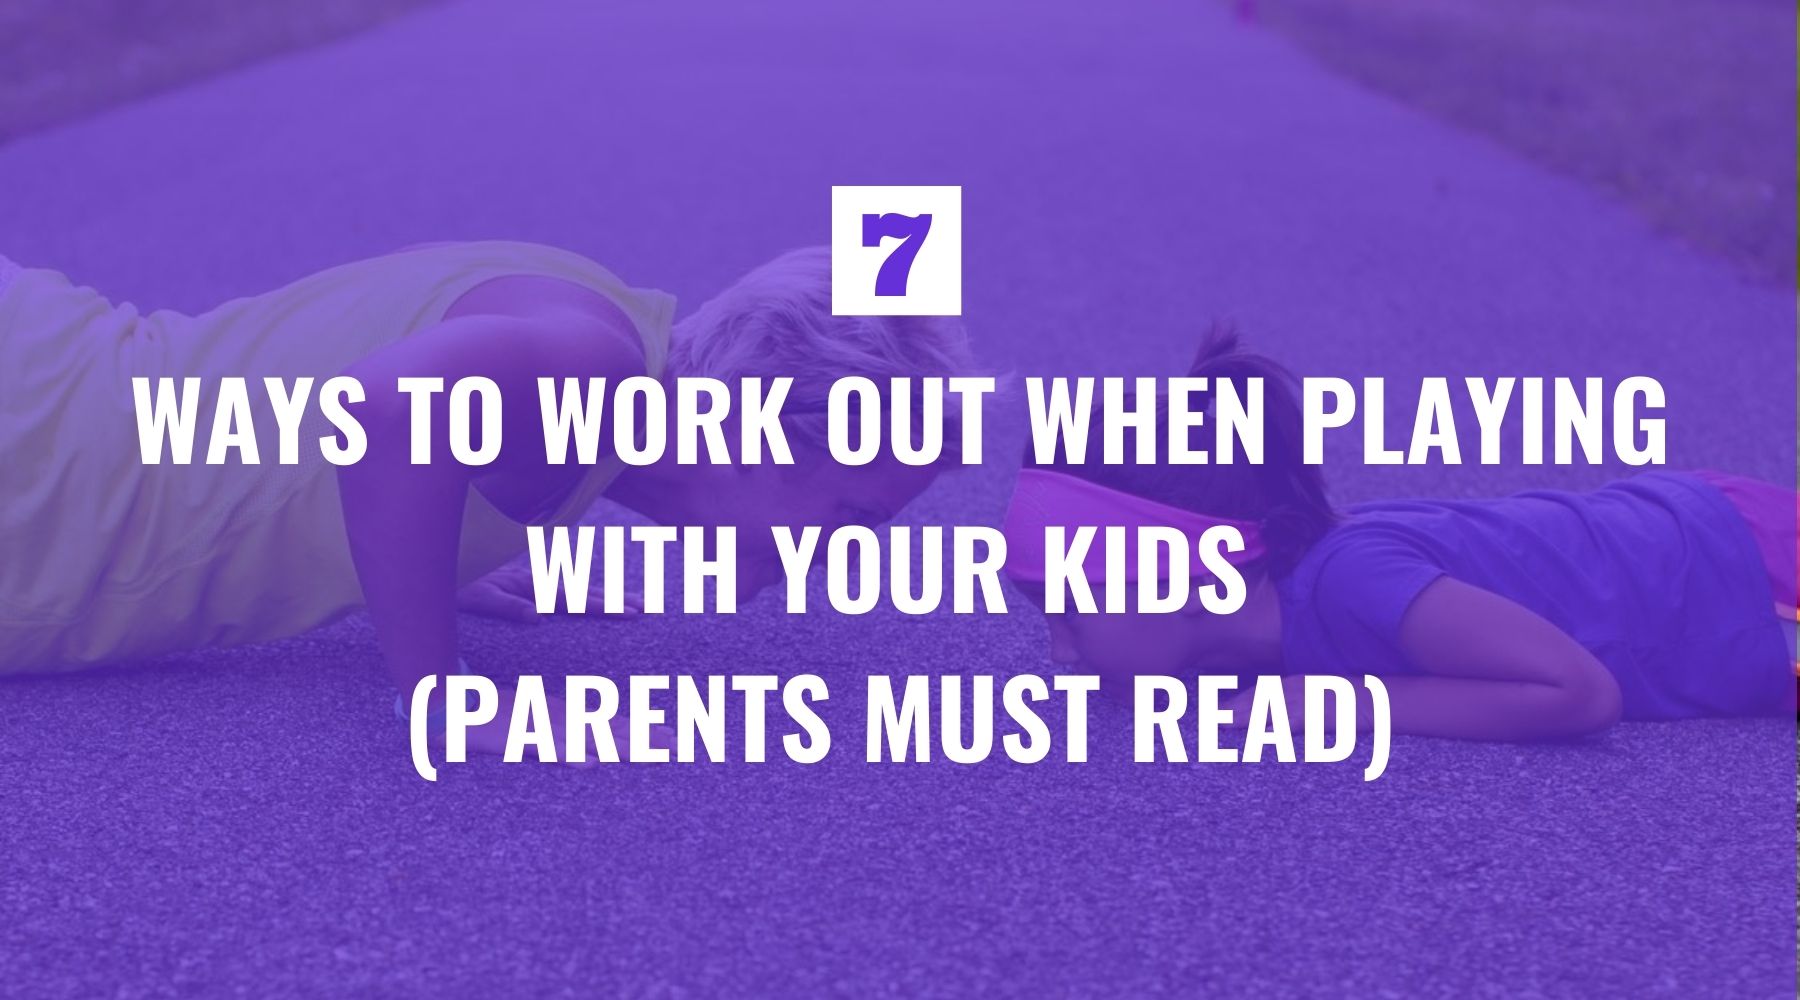 Seven Ways to Work Out When Playing with Your Kids (Parents Must Read)